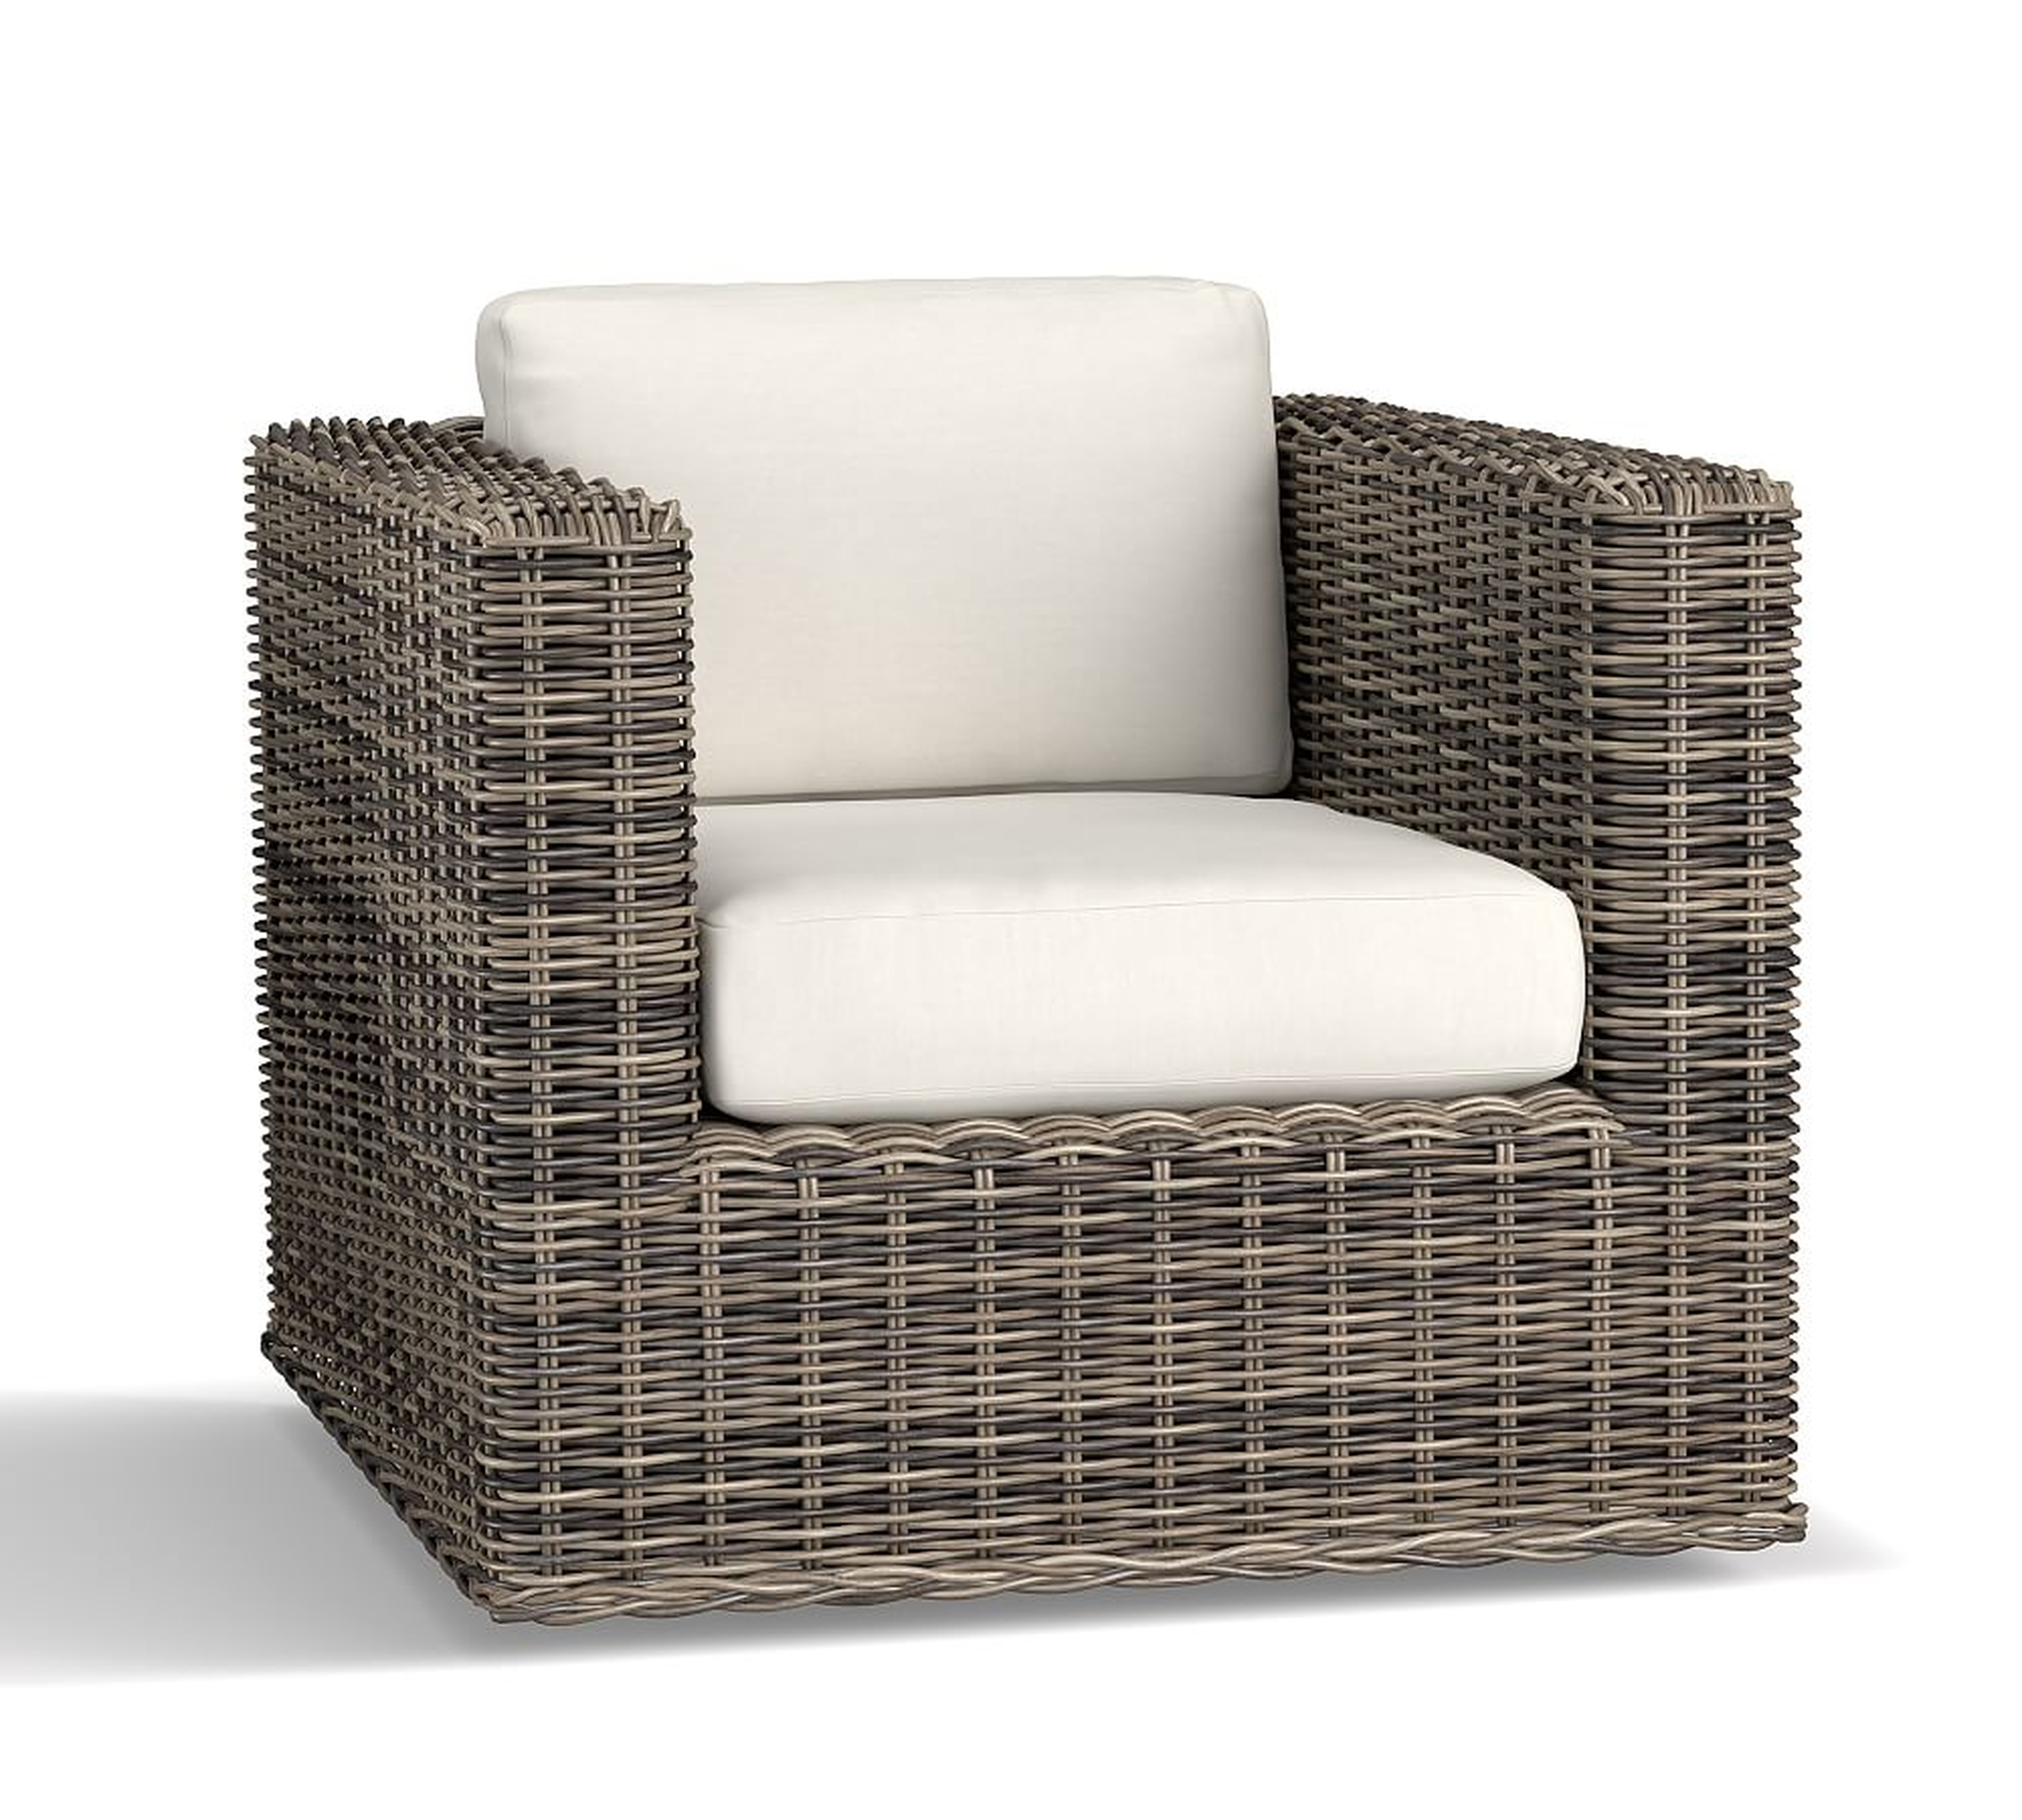 Huntington All-Weather Wicker Square Arm Lounge Chair - Pottery Barn